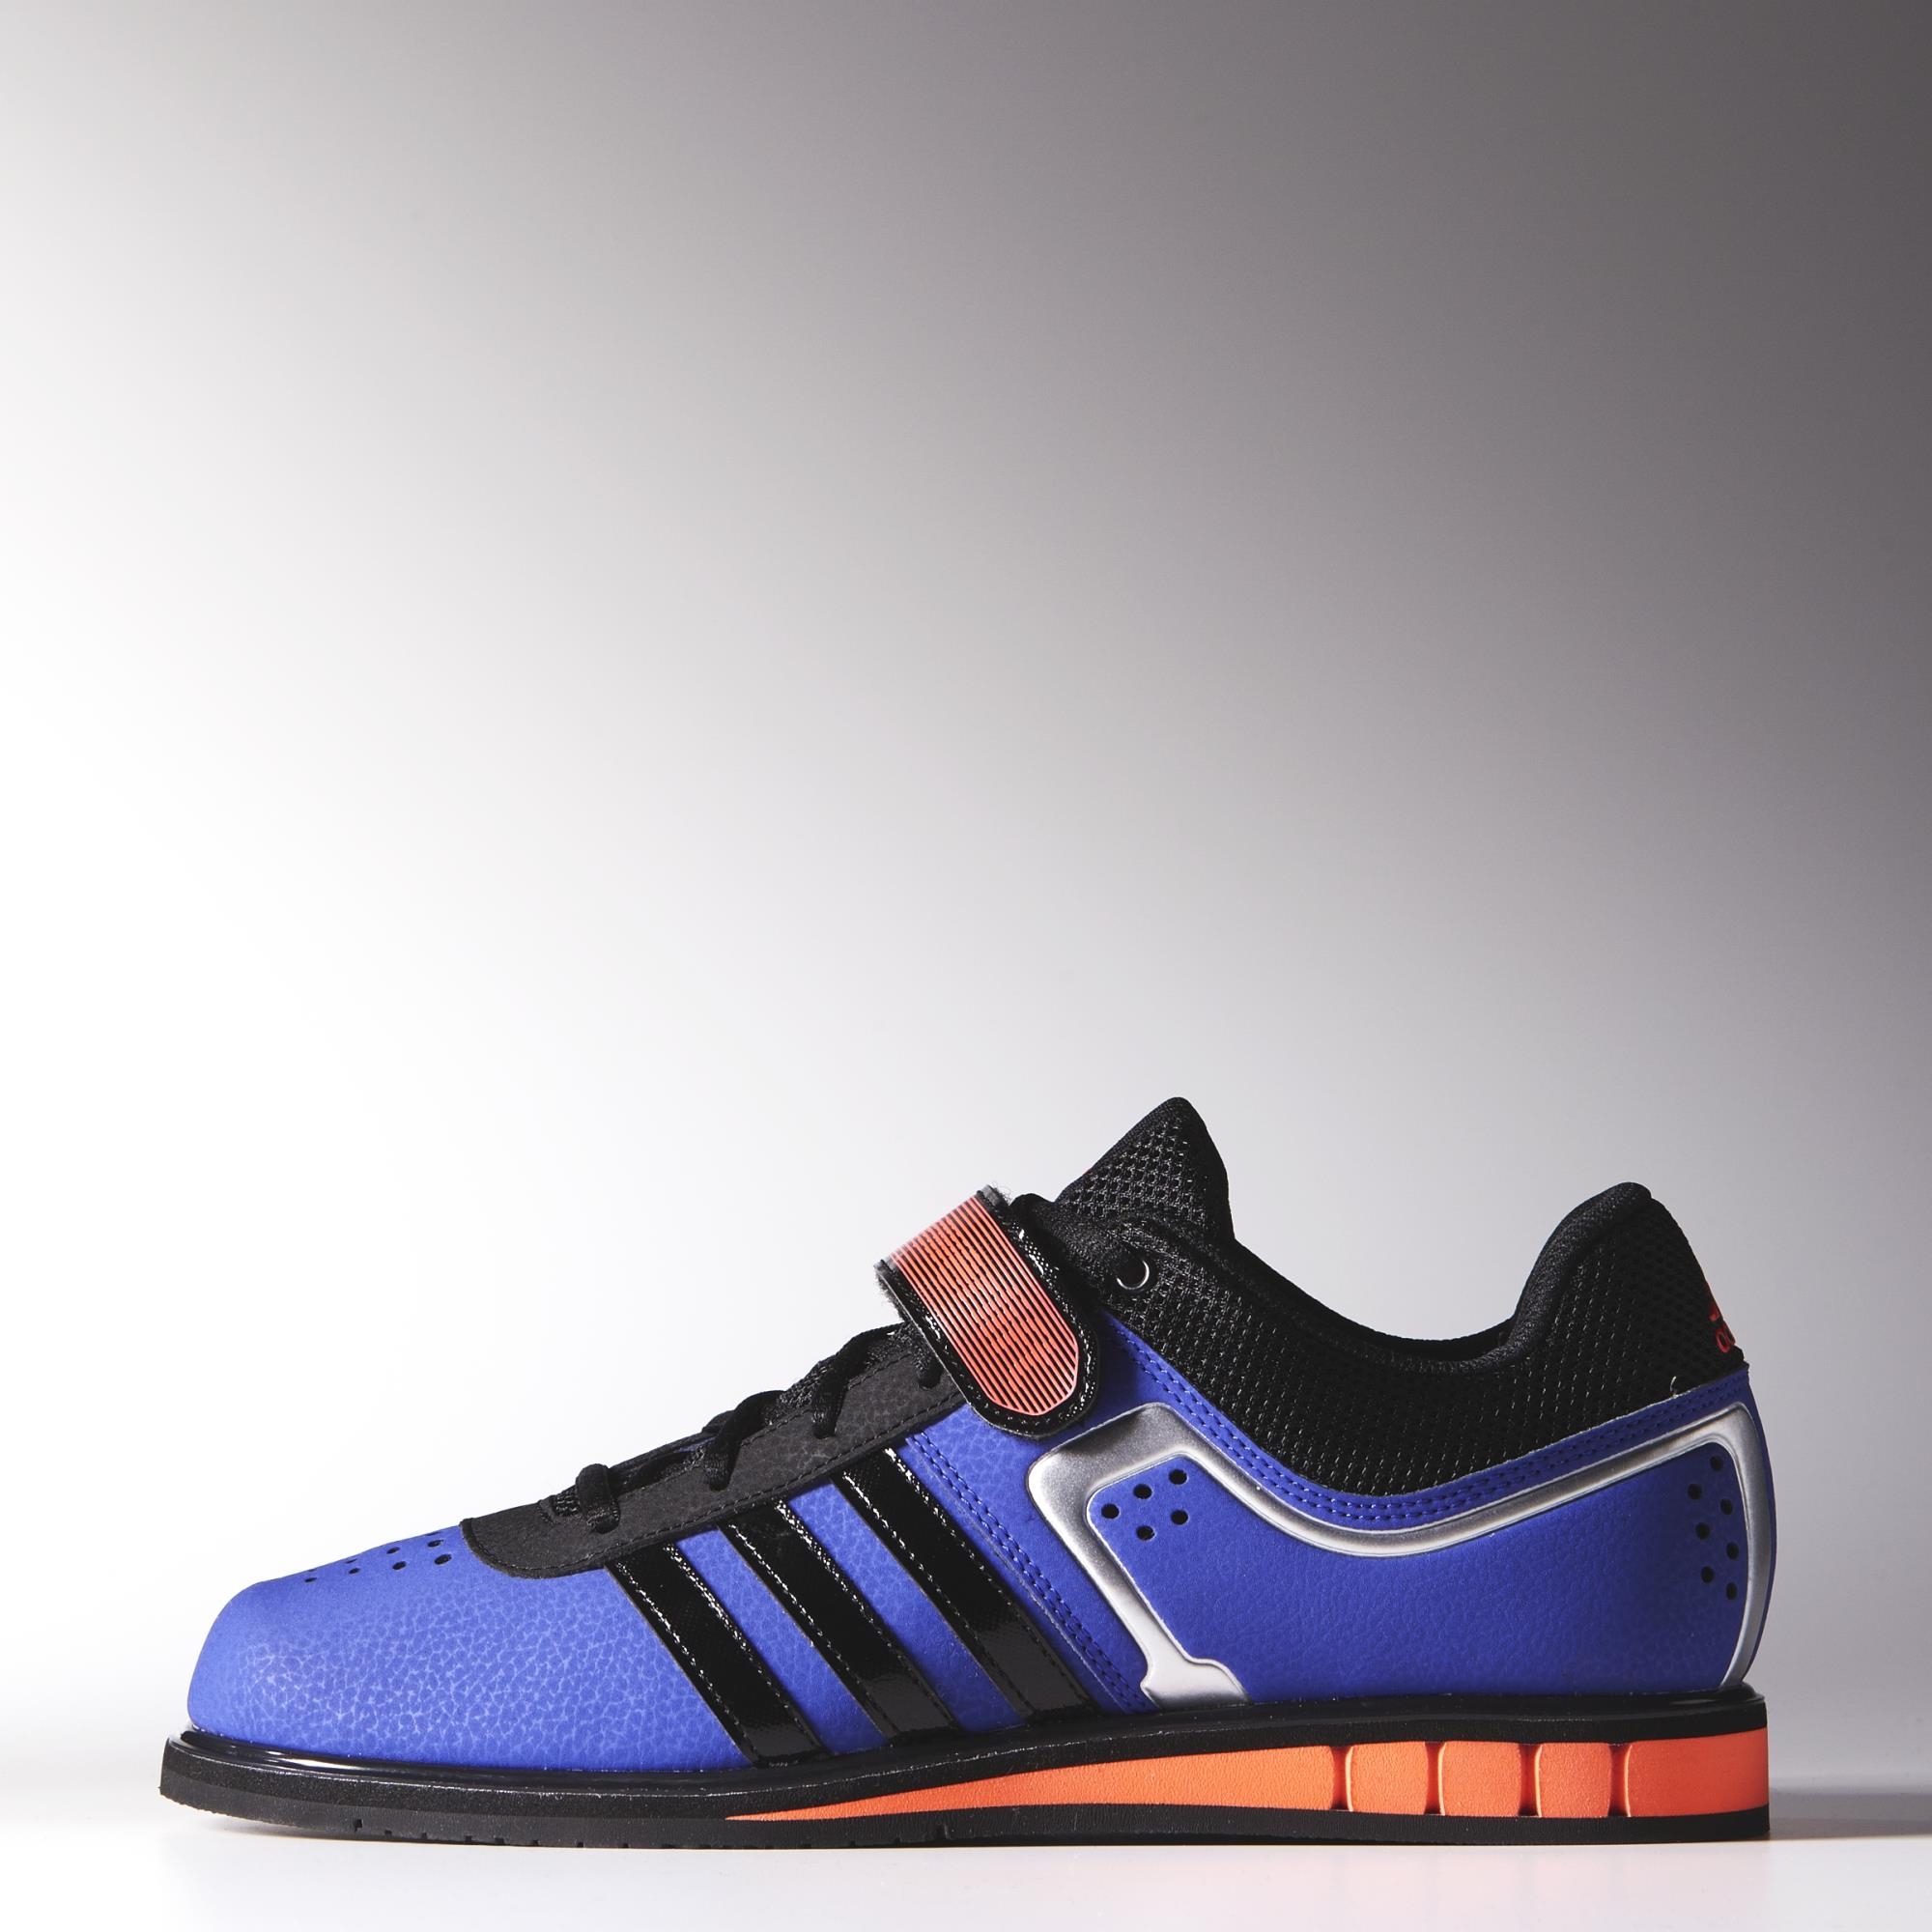 Adidas Powerlift 2.0 - Blue - Weightlifting Shoes - side